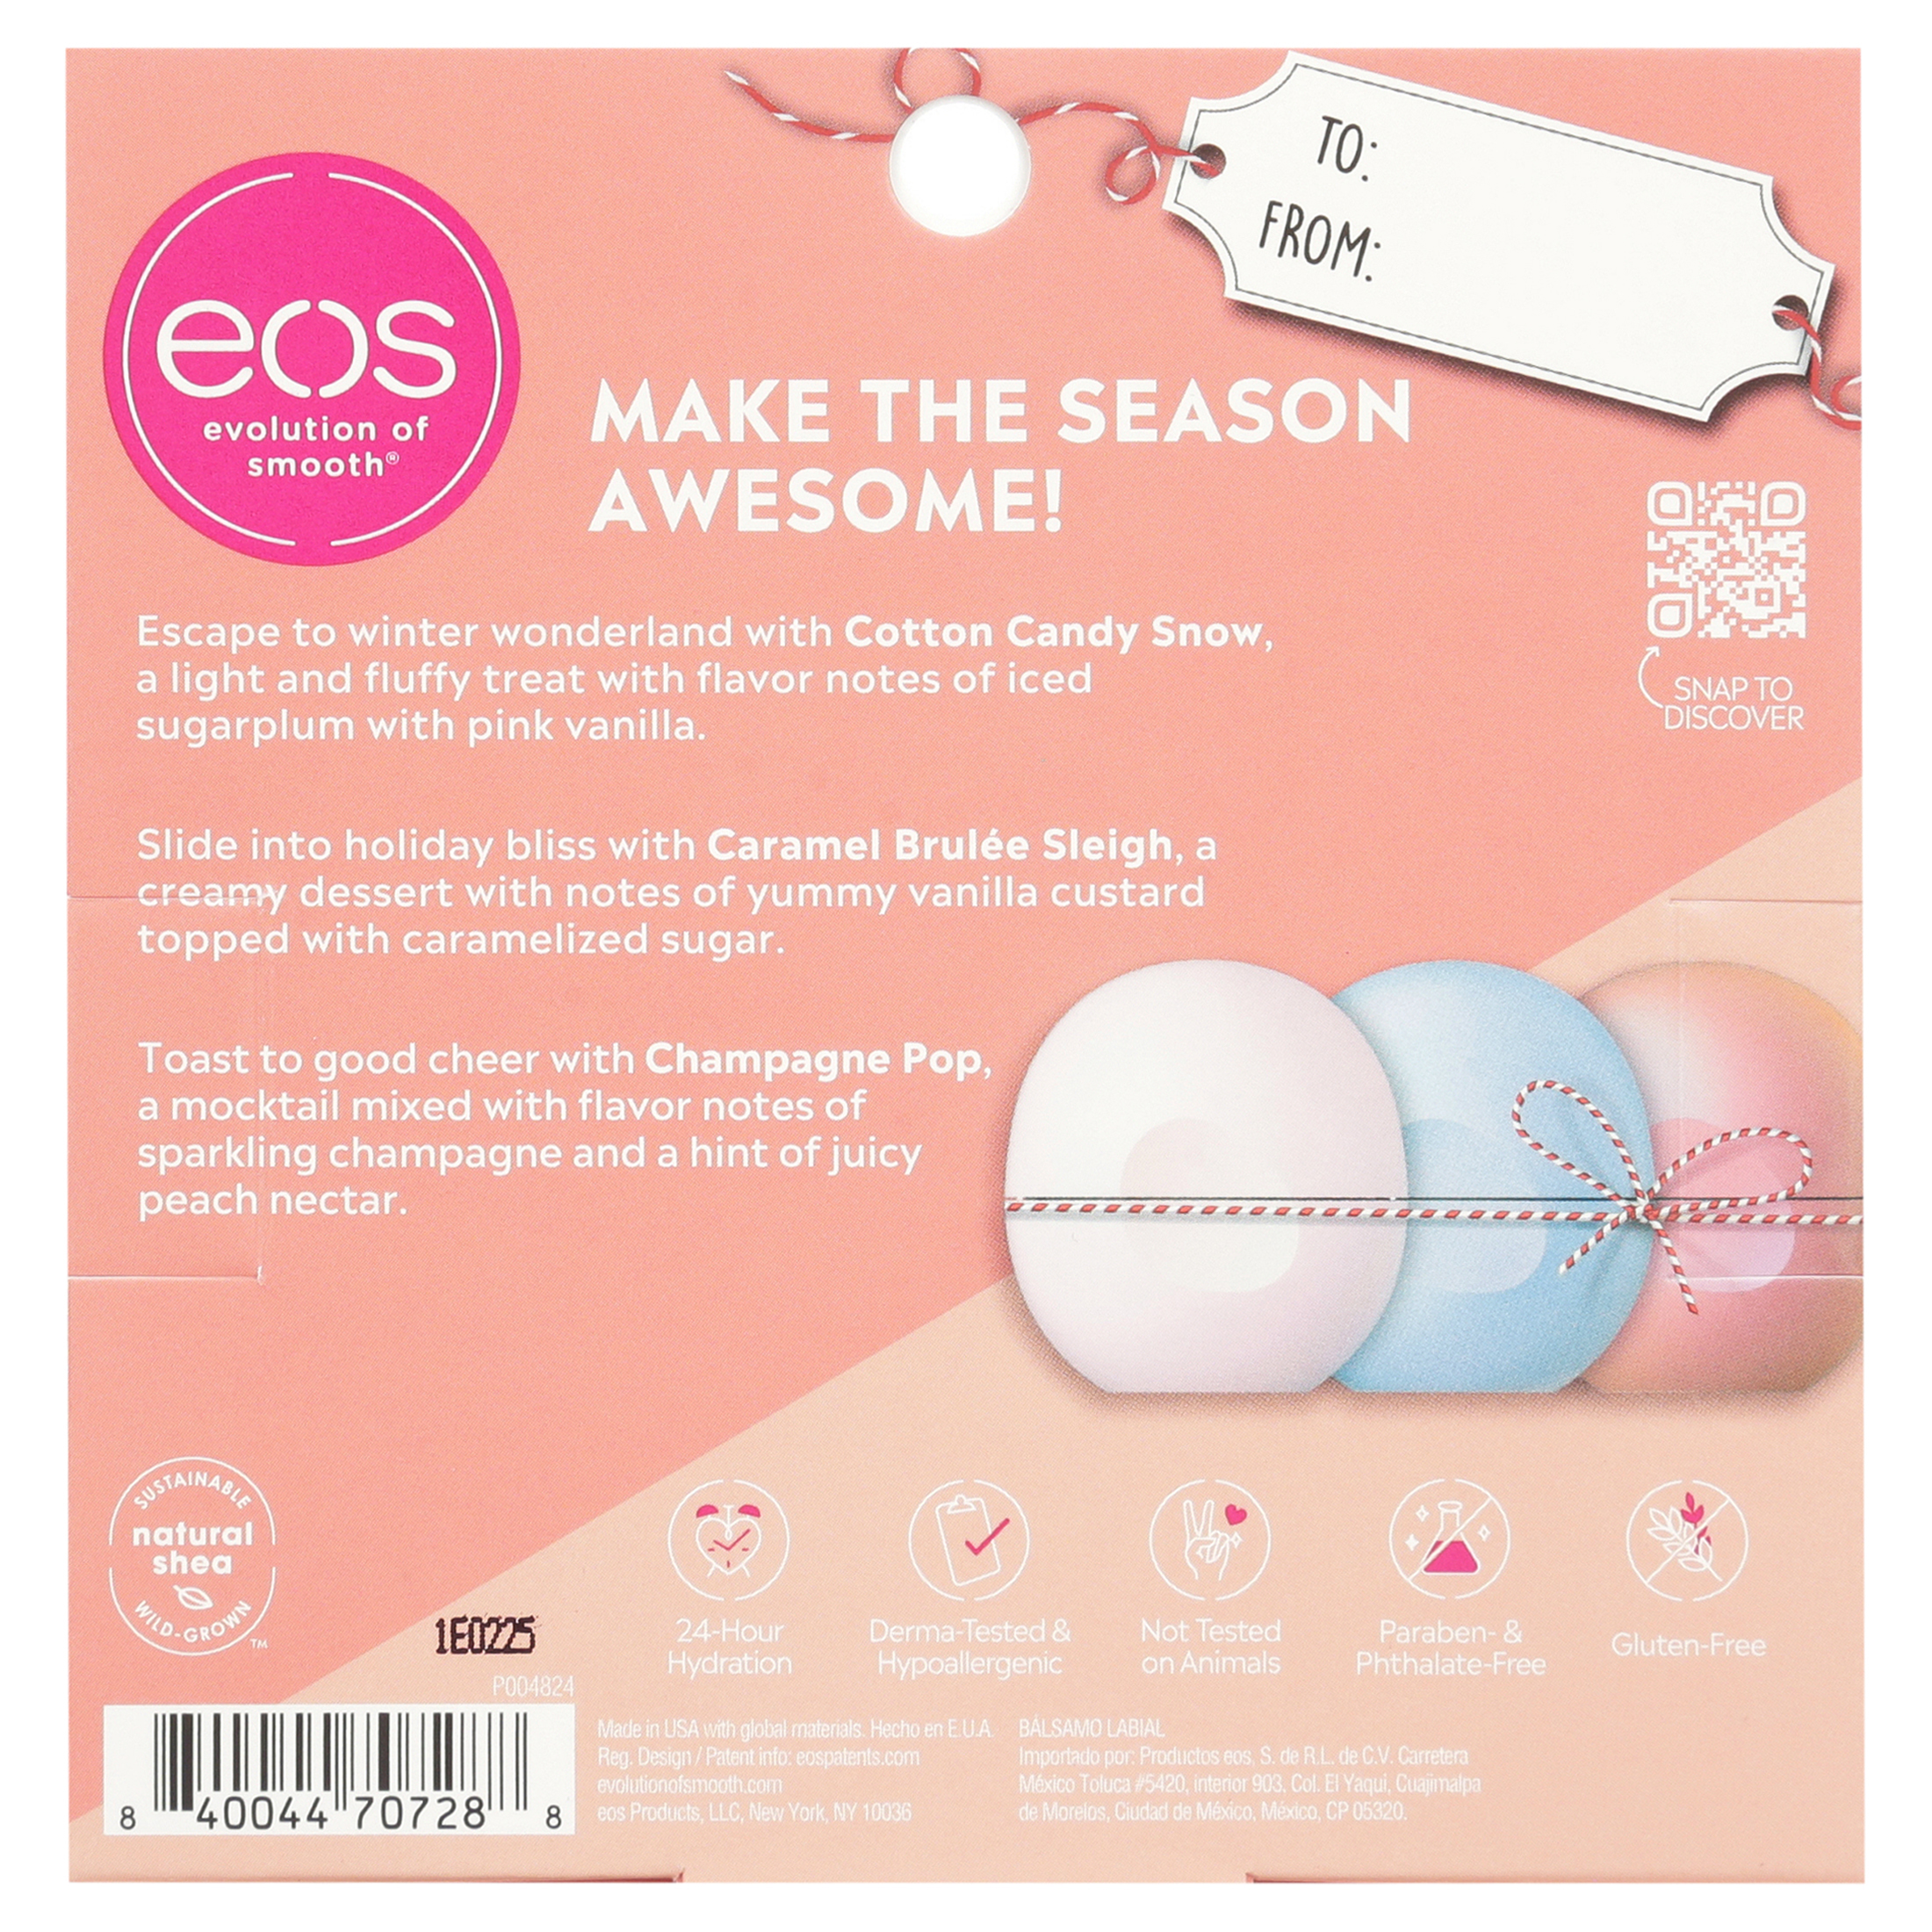 ($7.99 Value) eos Holiday Lip Balm Sphere , Cotton Candy Snow, Caramel Brulée Sleigh and Champagne Pop , Moisuturzing Shea Butter for Chapped Lips , 3 Count - image 5 of 9